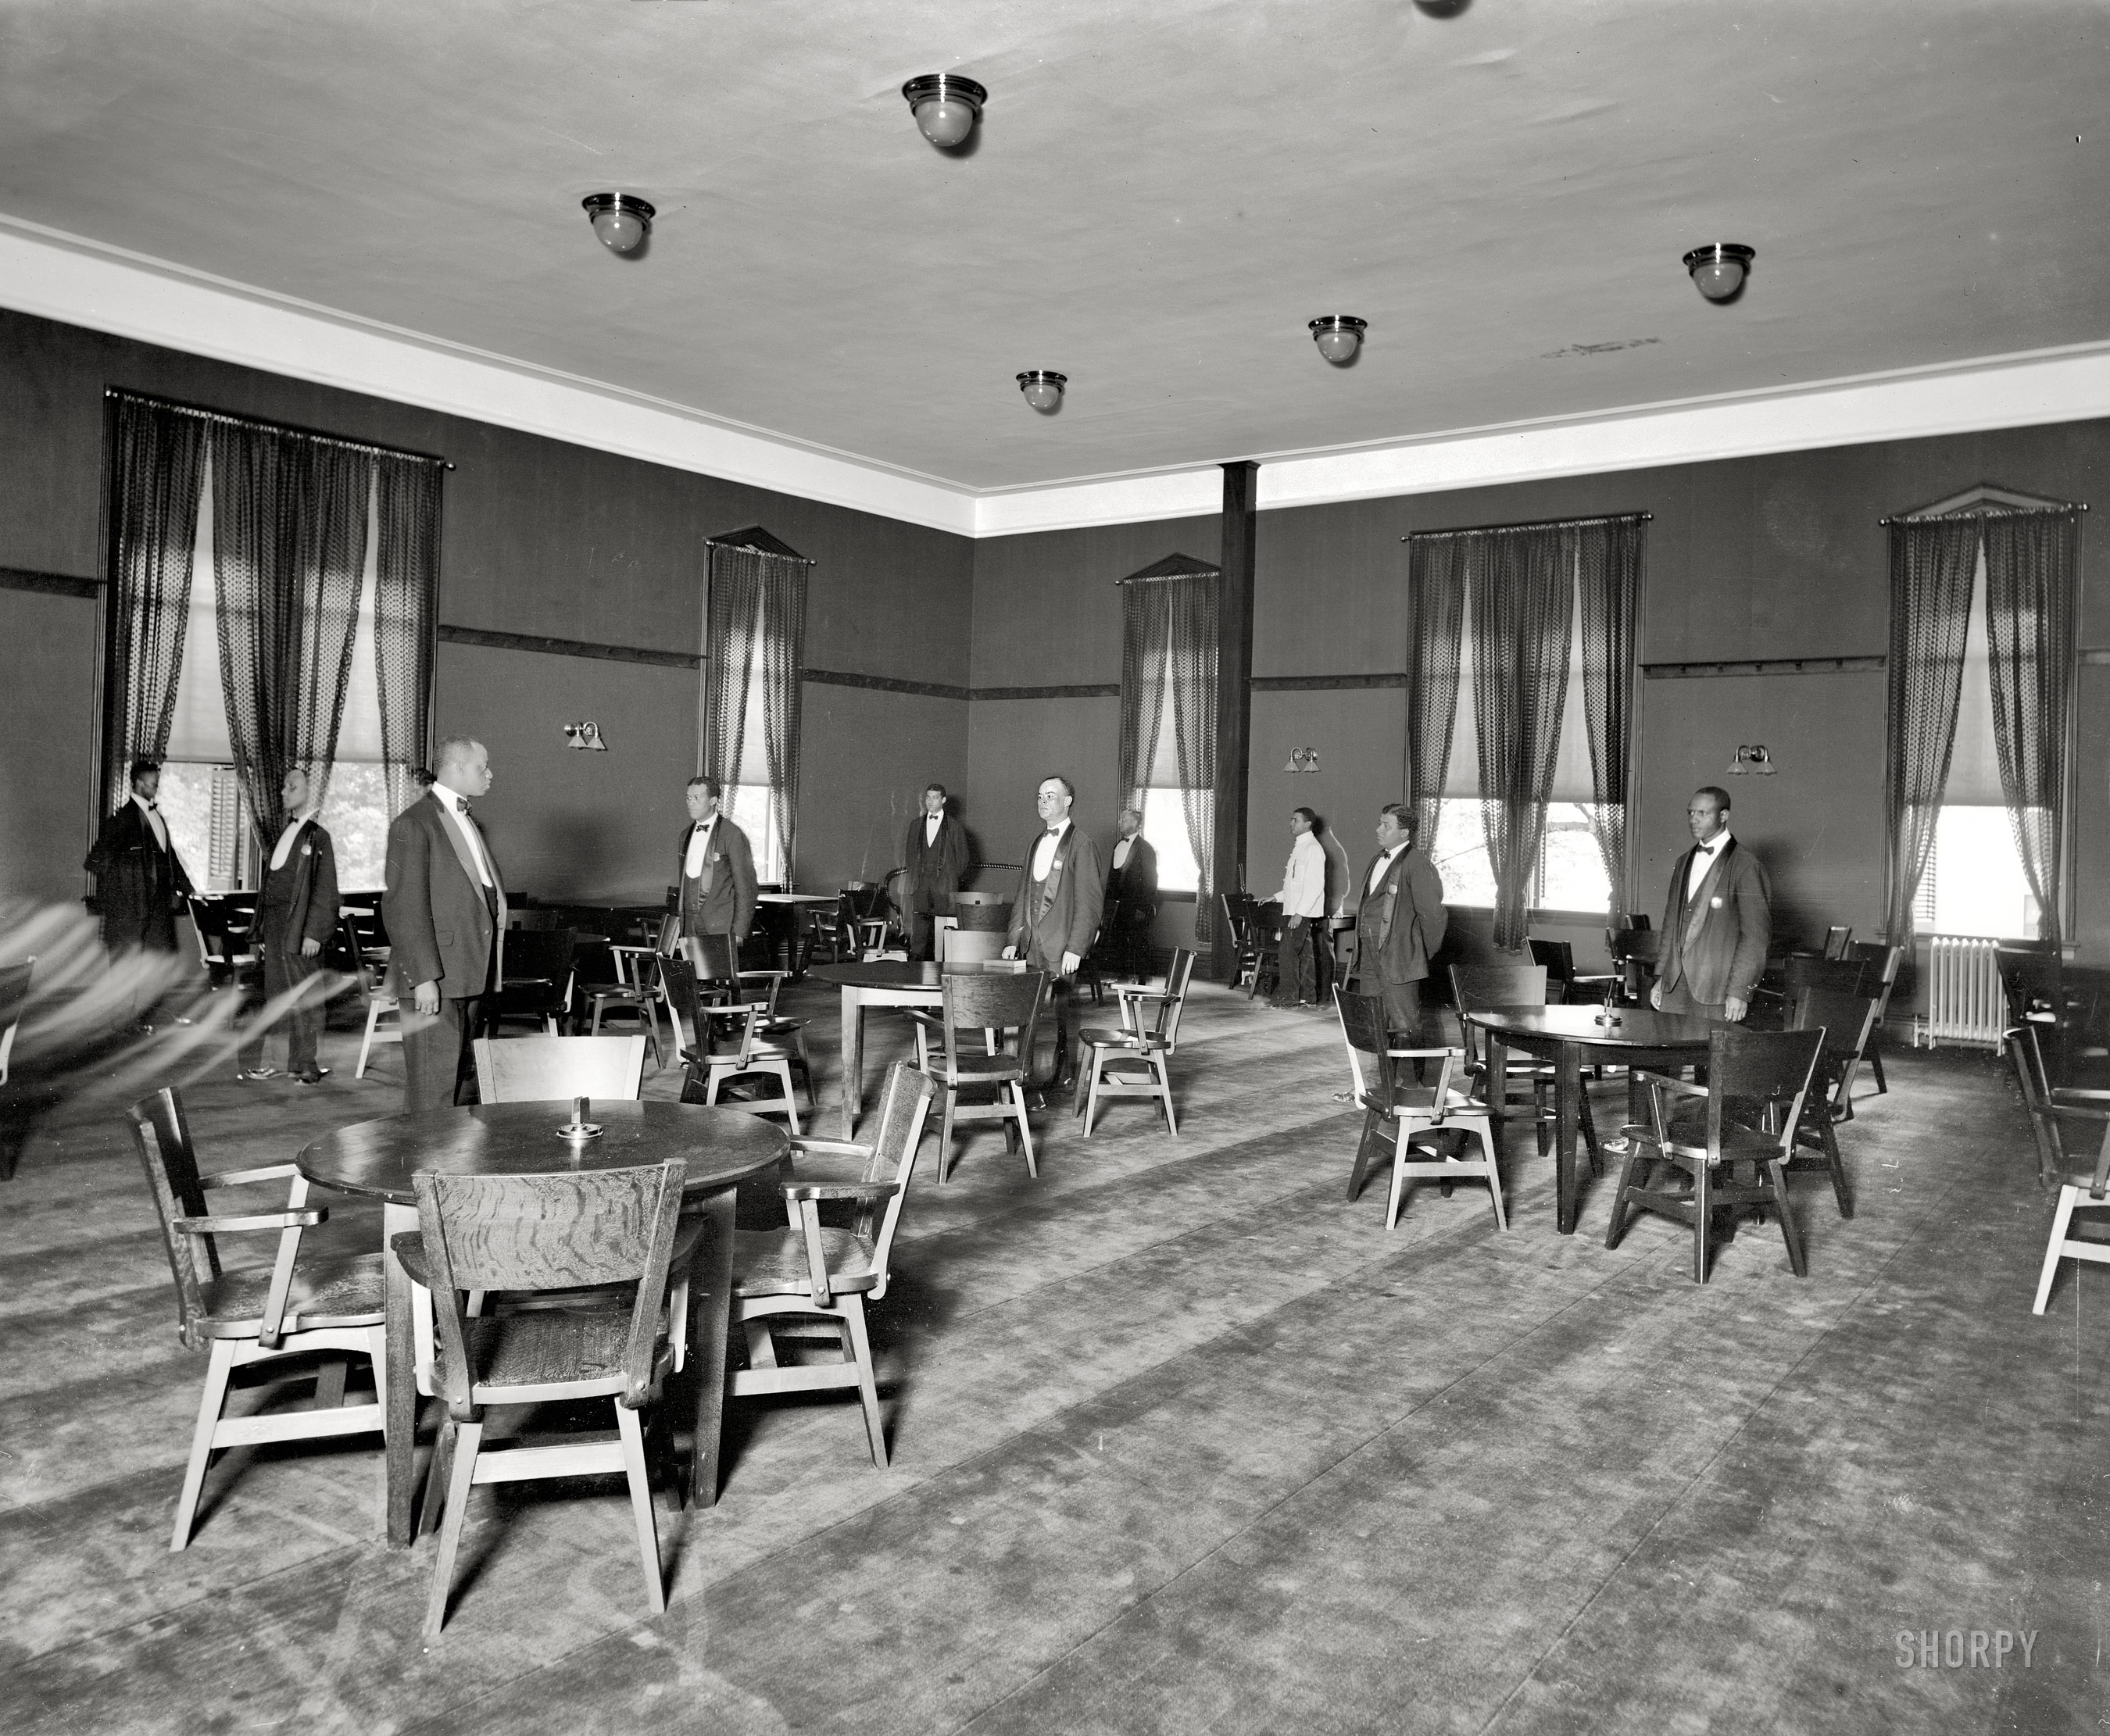 Lake George, New York, circa 1908. "The cafe, Fort William Henry Hotel." Welcome to the Purgatory Room, with cocktails and dancing nightly in the Limbo Lounge. 8x10 inch dry plate glass negative. View full size.